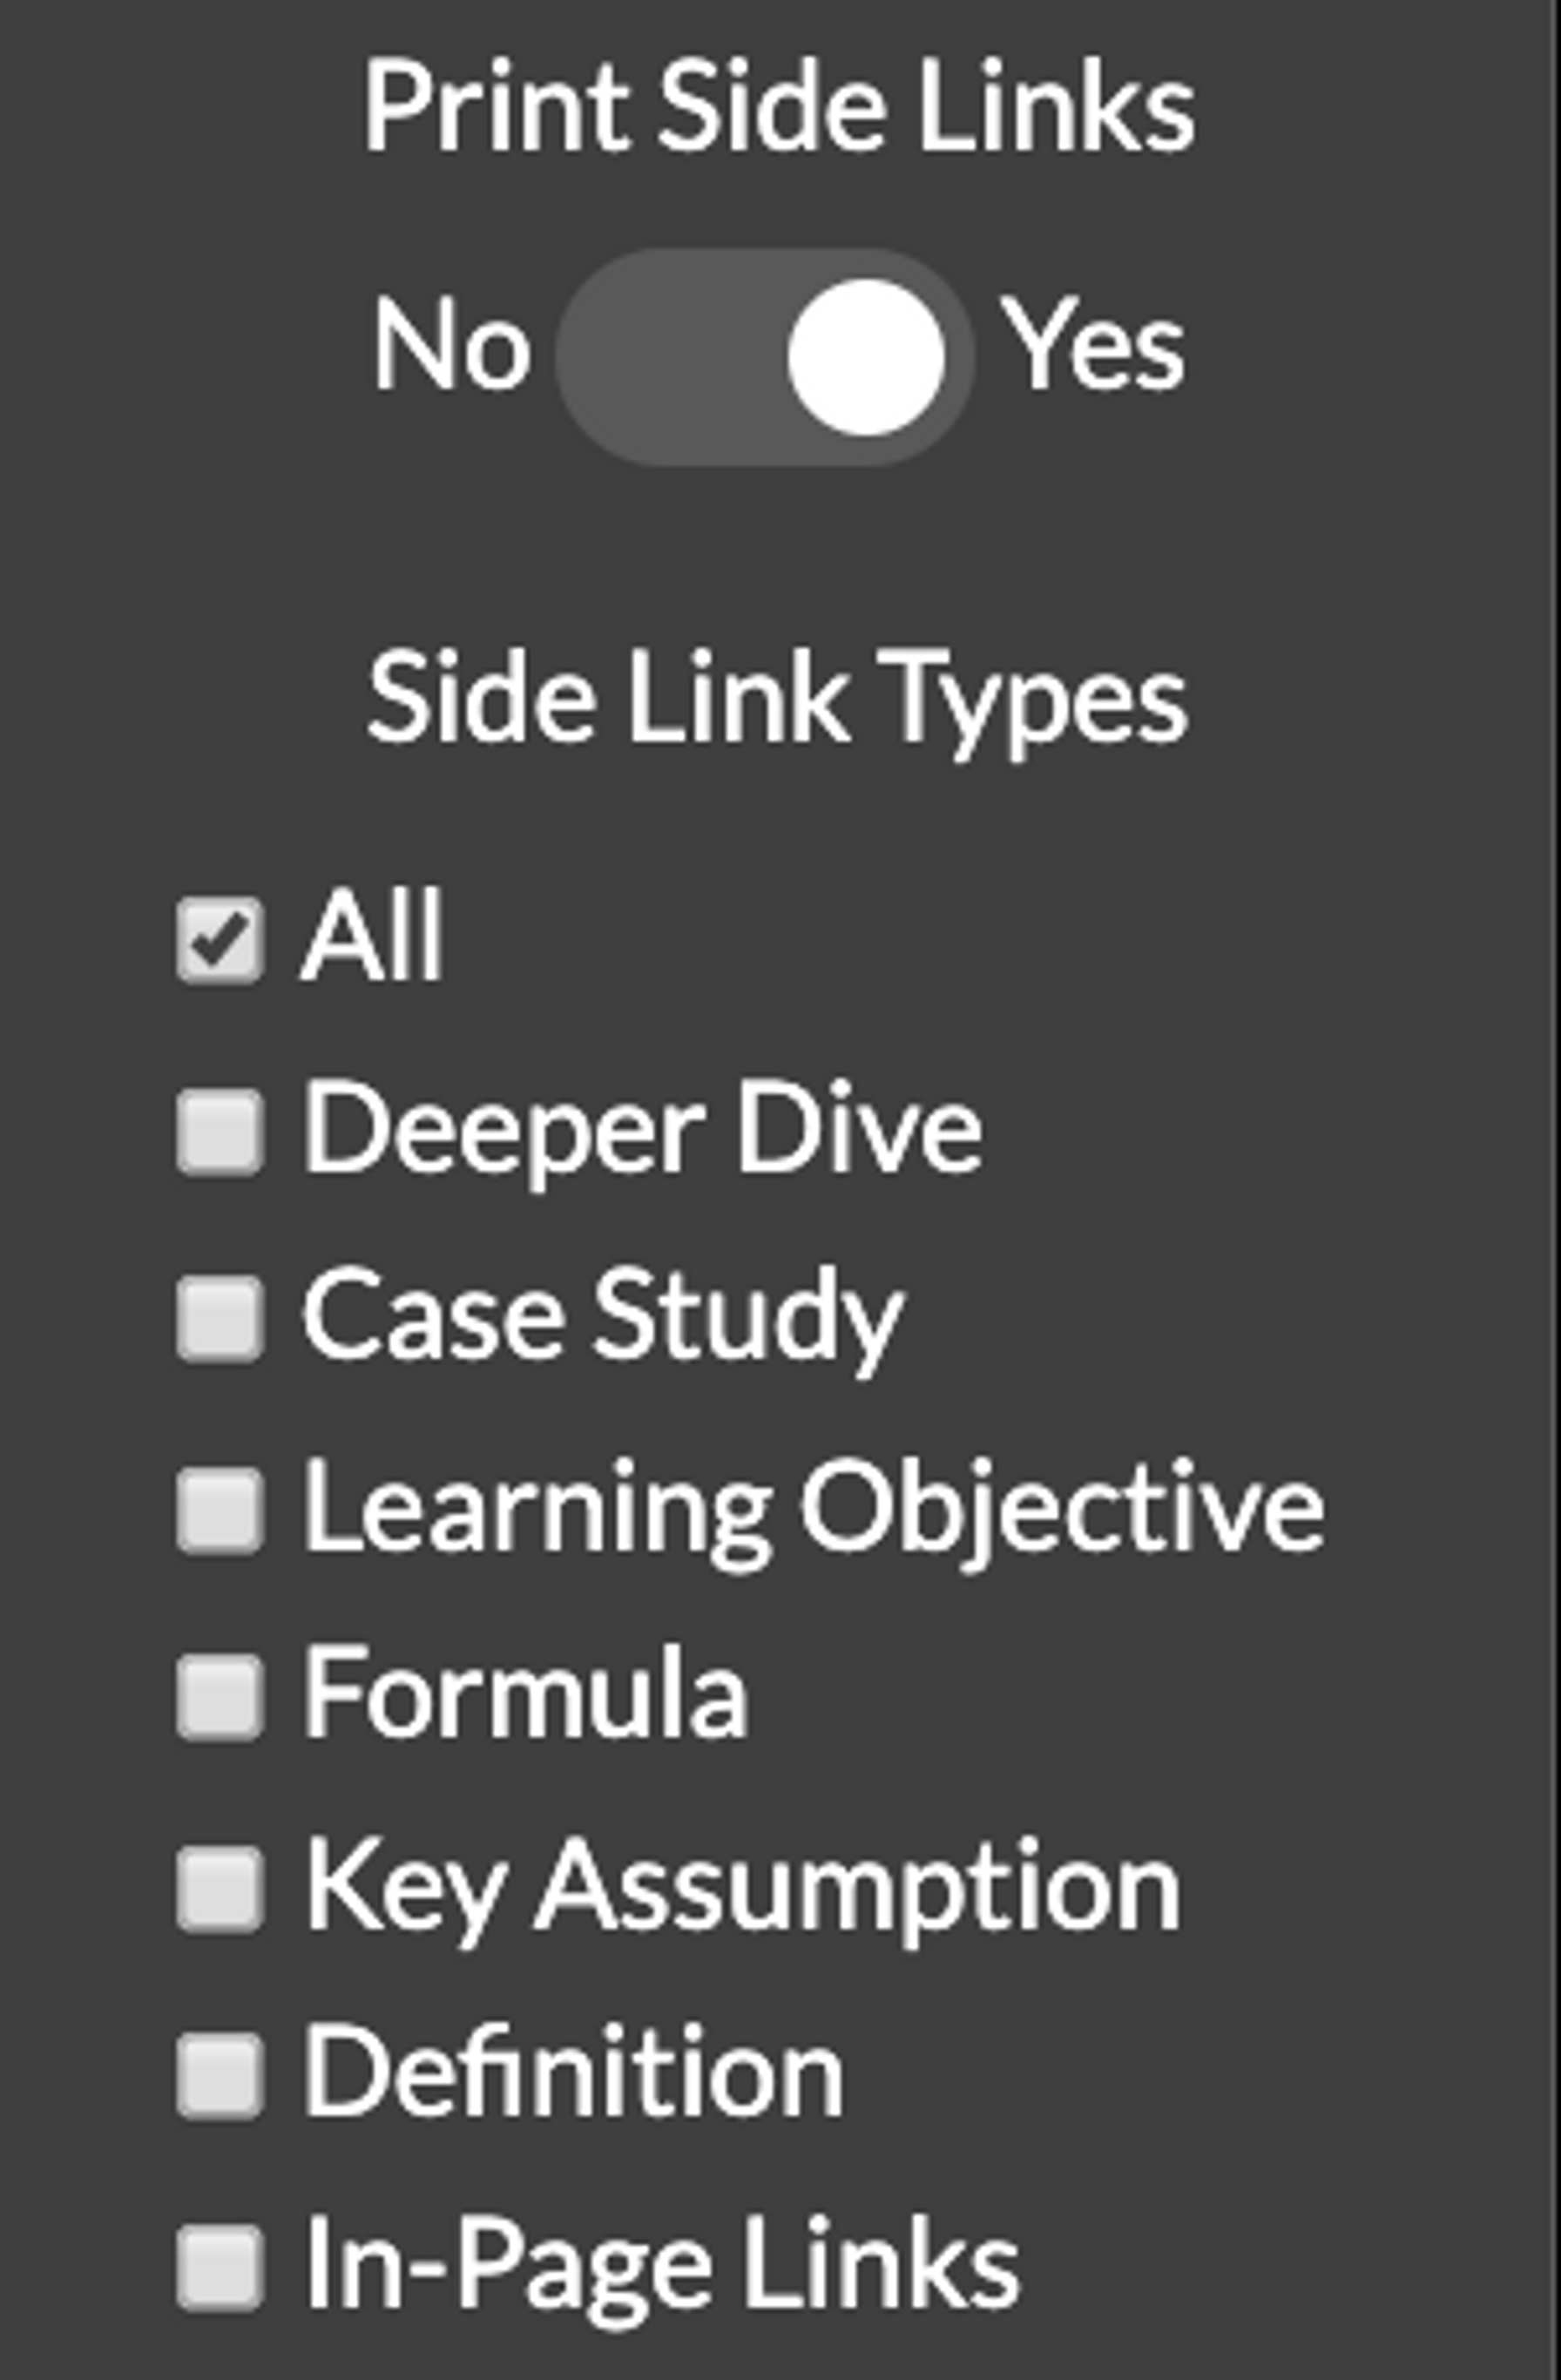 selecting which side links to print